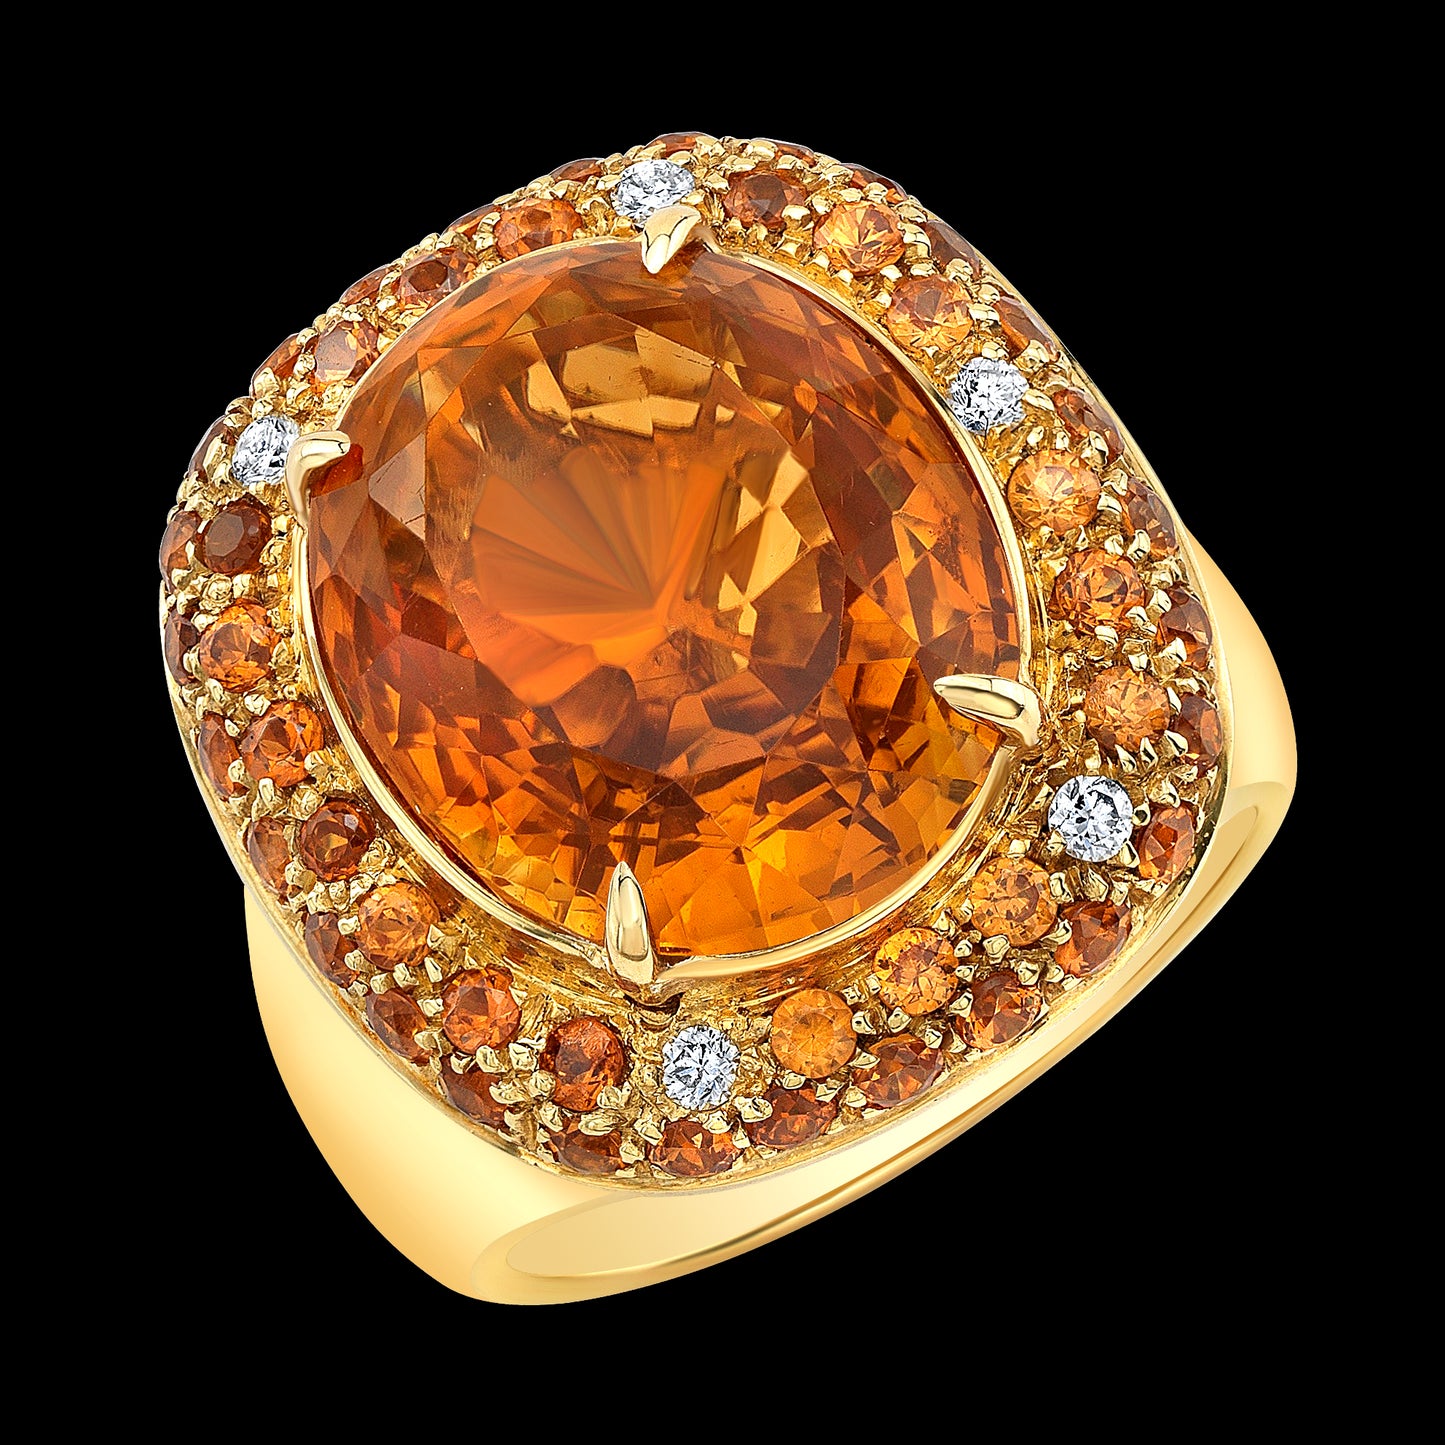 Load image into Gallery viewer, Citrine with Accents of Spessartite Garnets and Diamonds
